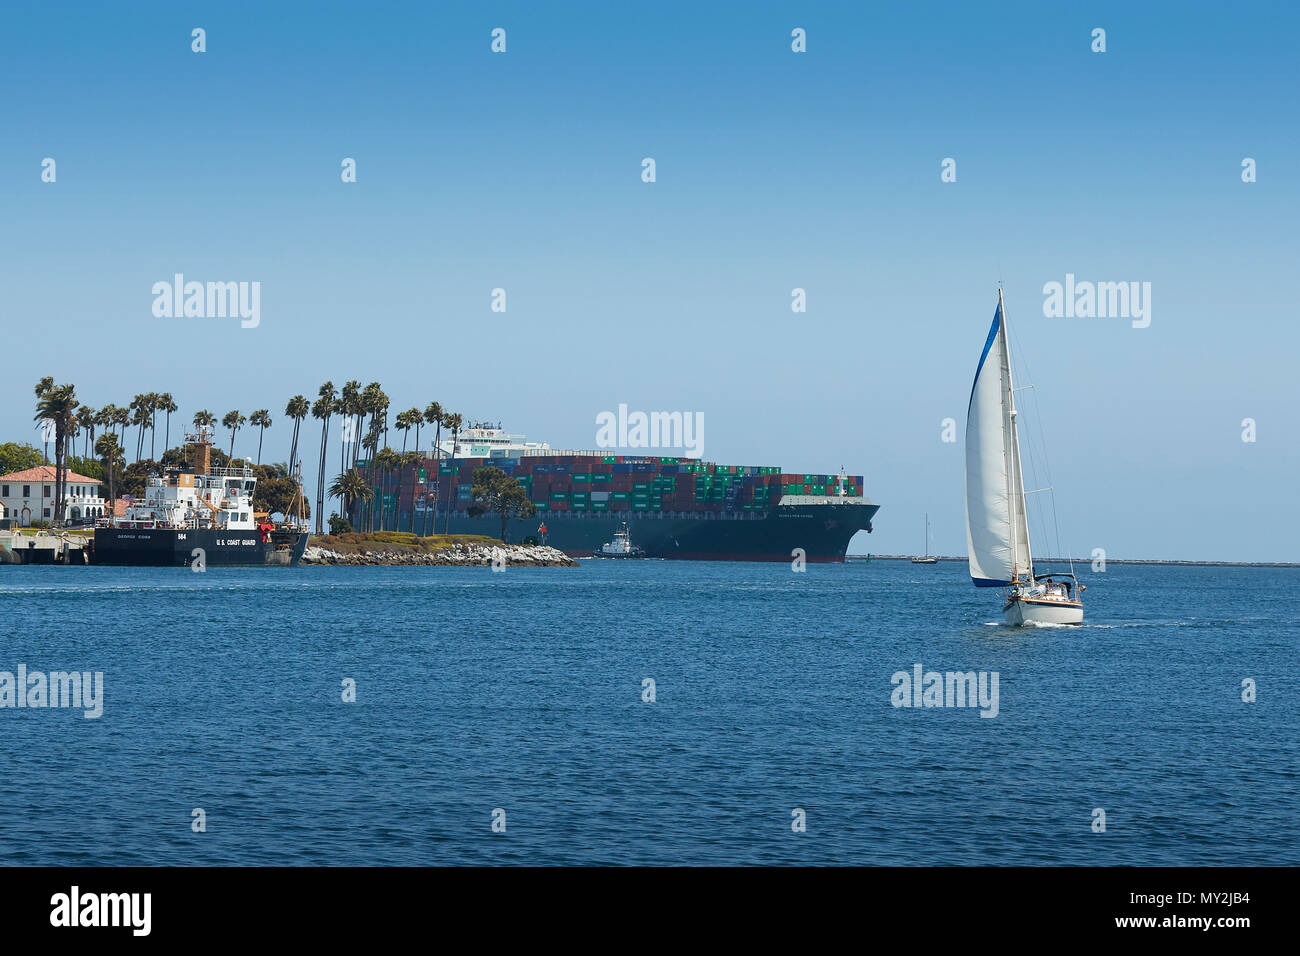 The Container Ship, SEAMAX NEW HAVEN, Entering The Los Angeles Main Channel In The Port Of Los Angeles, California, USA. Stock Photo